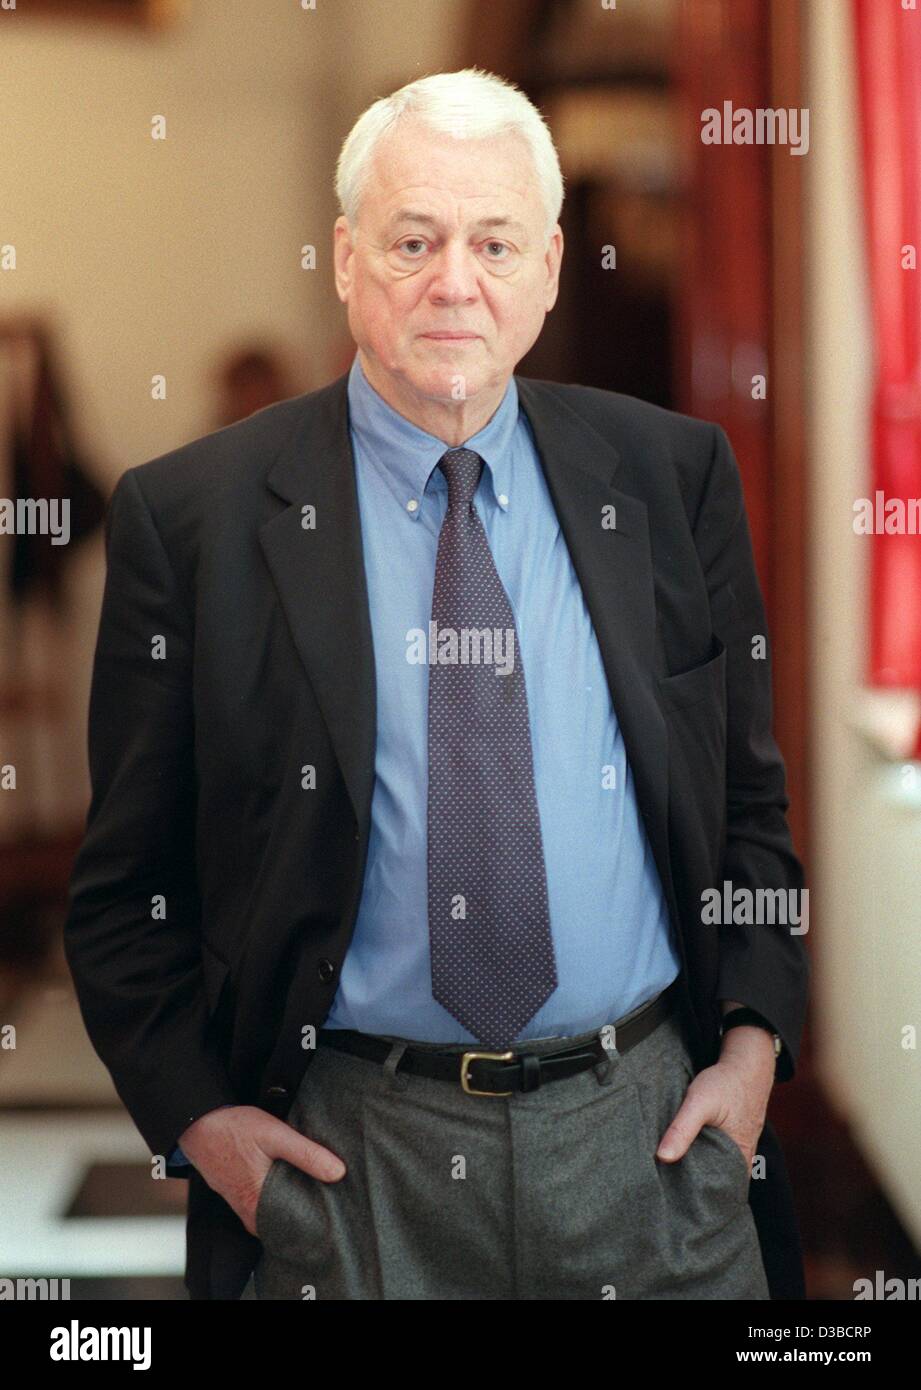 (dpa files) - German author and filmmaker Alexander Kluge ('Deutschland im Herbst'/'Germany in Autumn'), pictured in Bremen, Germany, 26 January 2001. Born on 14 February 1932 in Halberstadt, Germany, Kluge was one of the founders of the 'Oberhausener Manifest' in 1962. Since 1988 he produces broadc Stock Photo